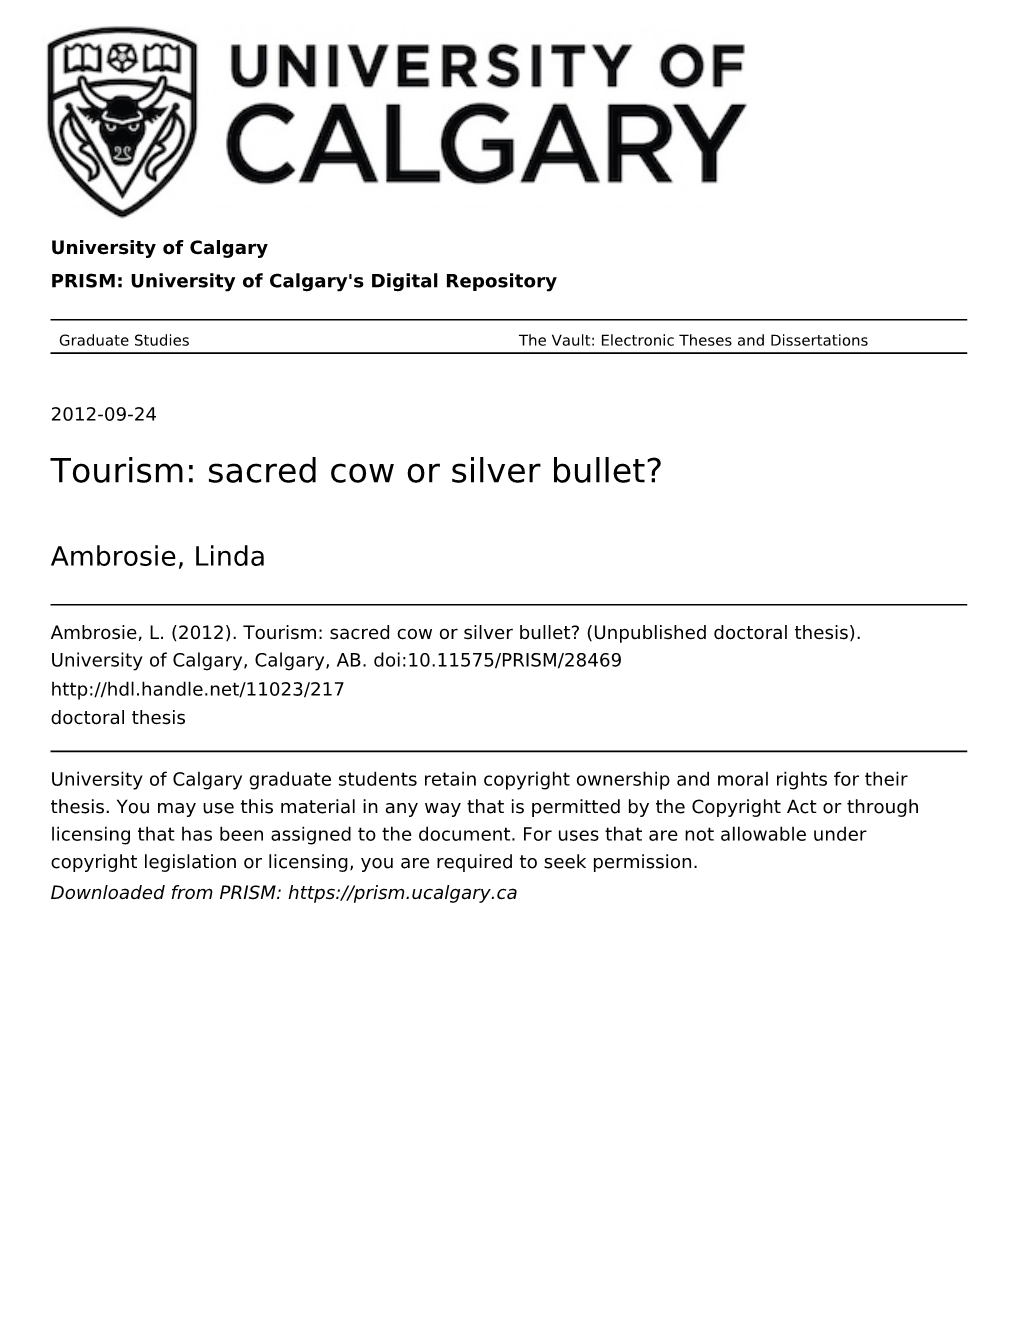 Tourism: Sacred Cow Or Silver Bullet?